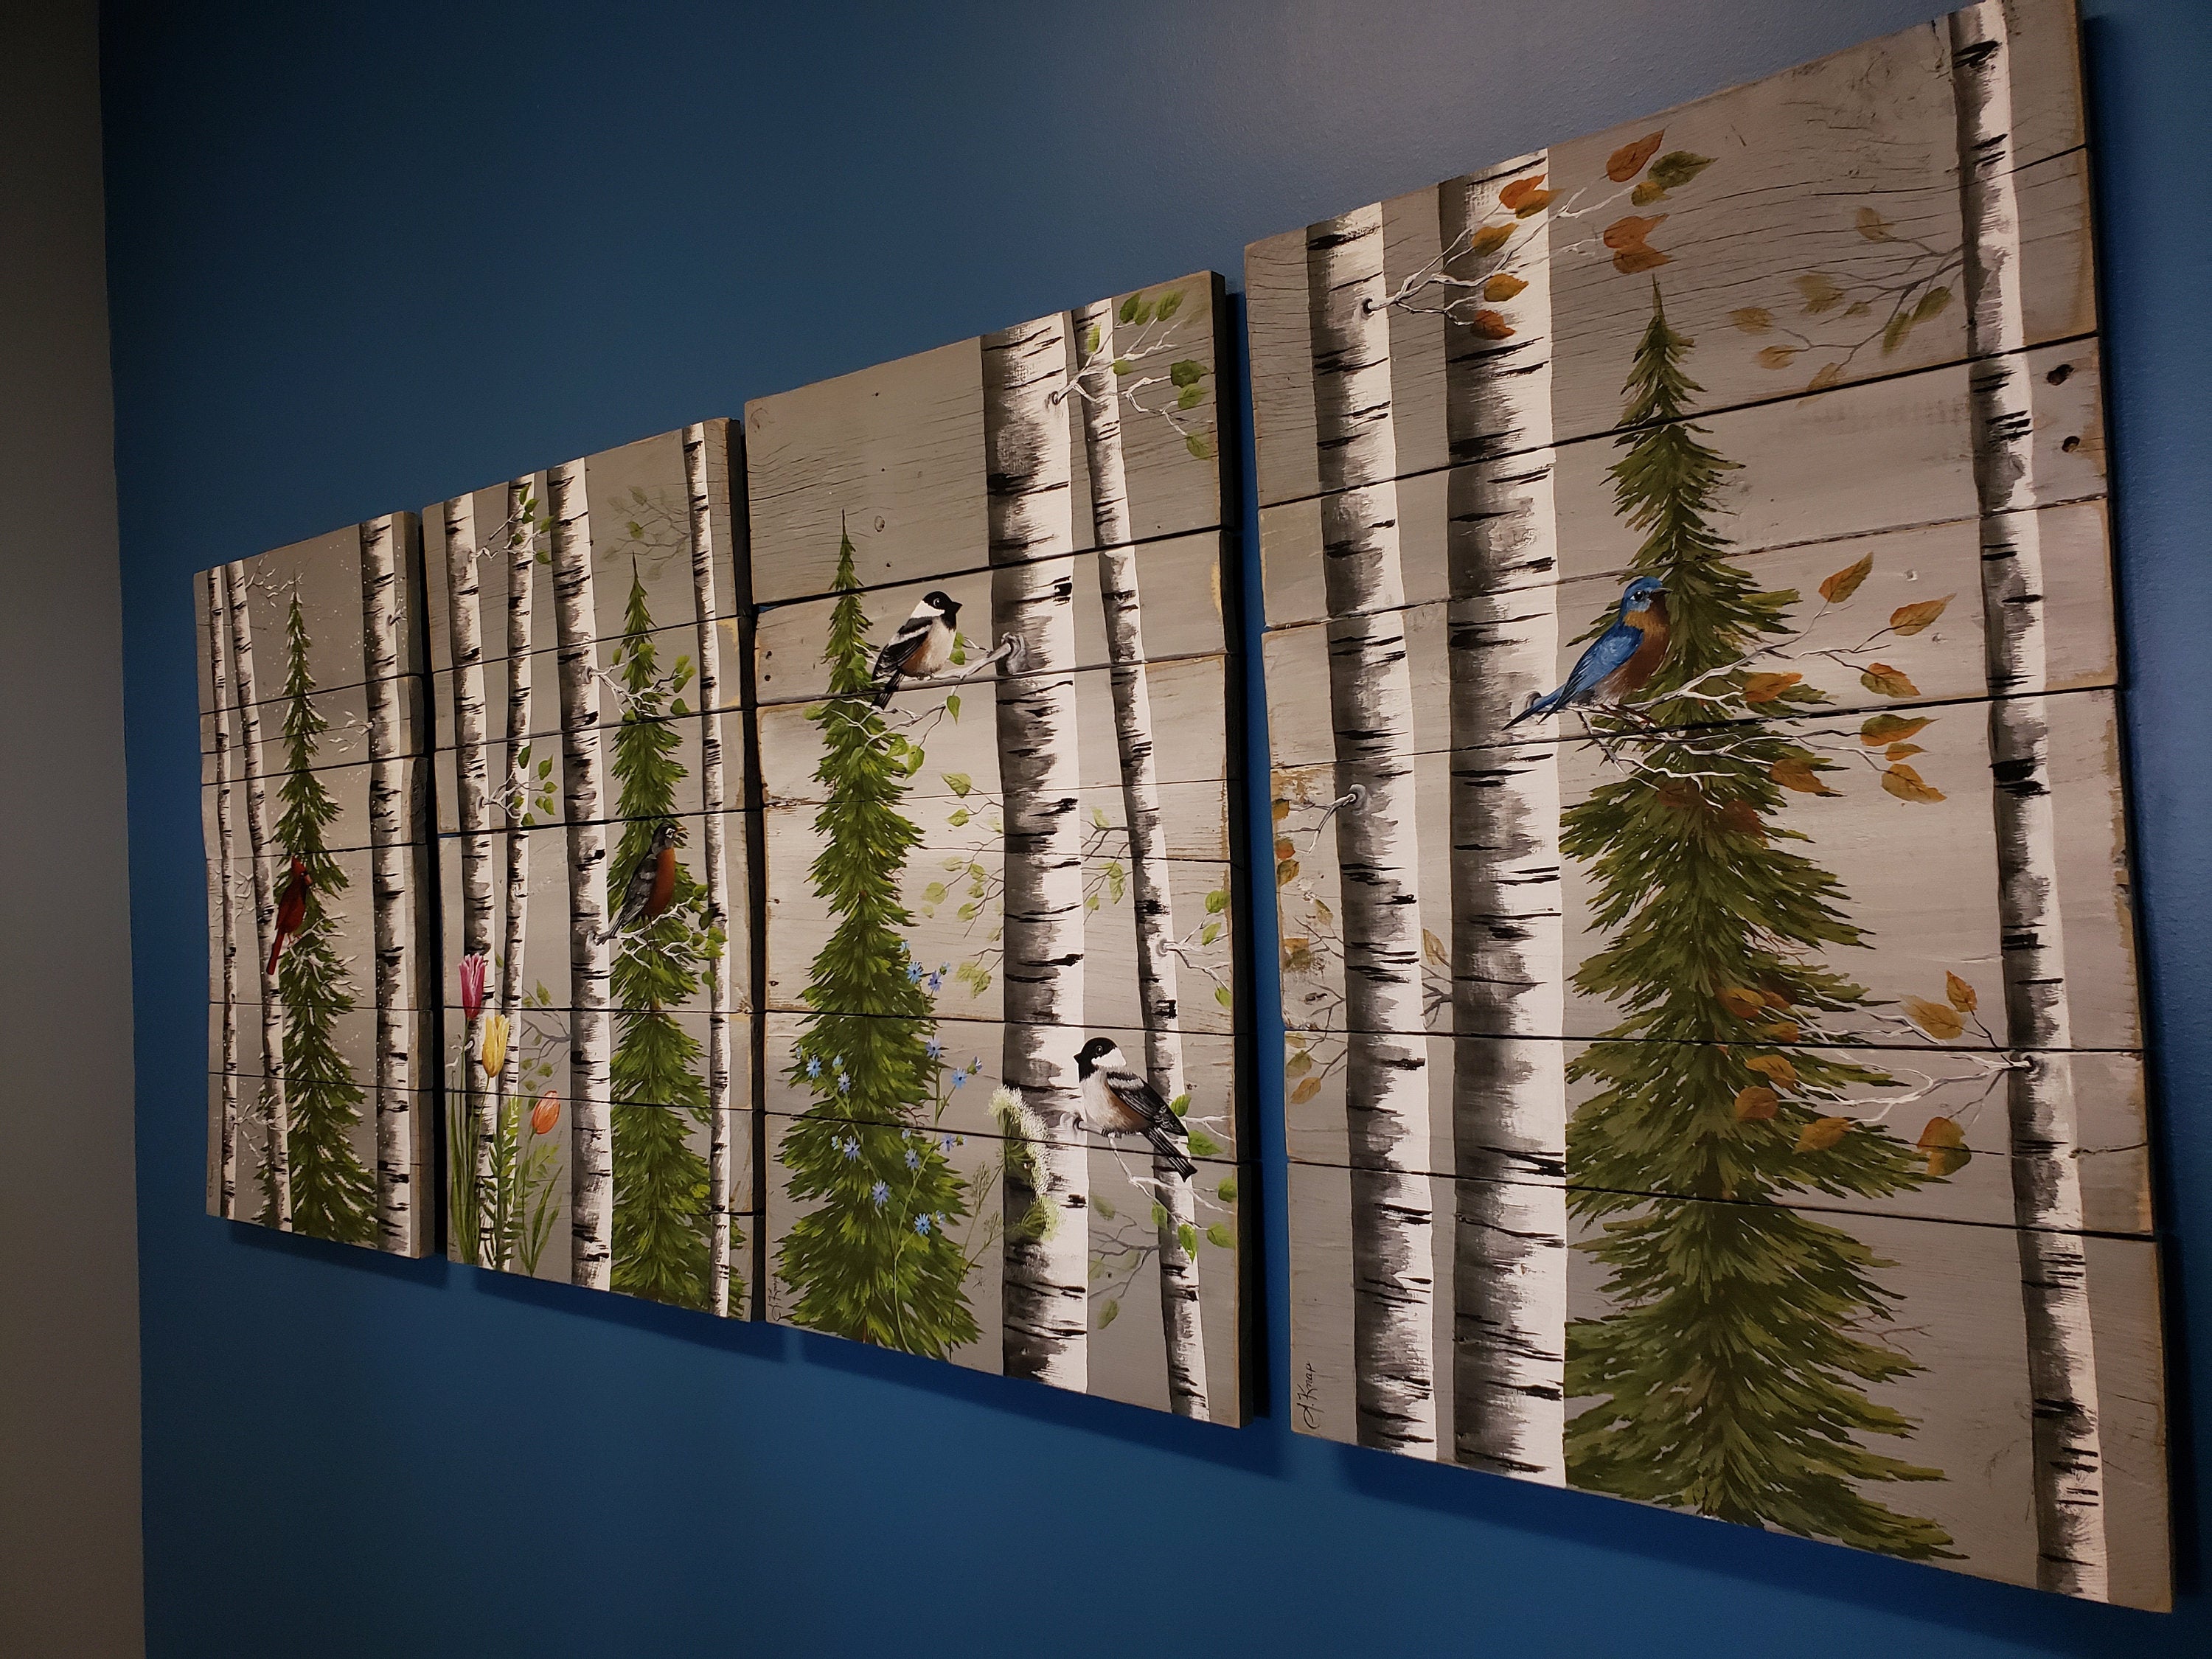 Large Couch living room art grouping, 4 Seasons paintings, white birch Paintings on pallet wood